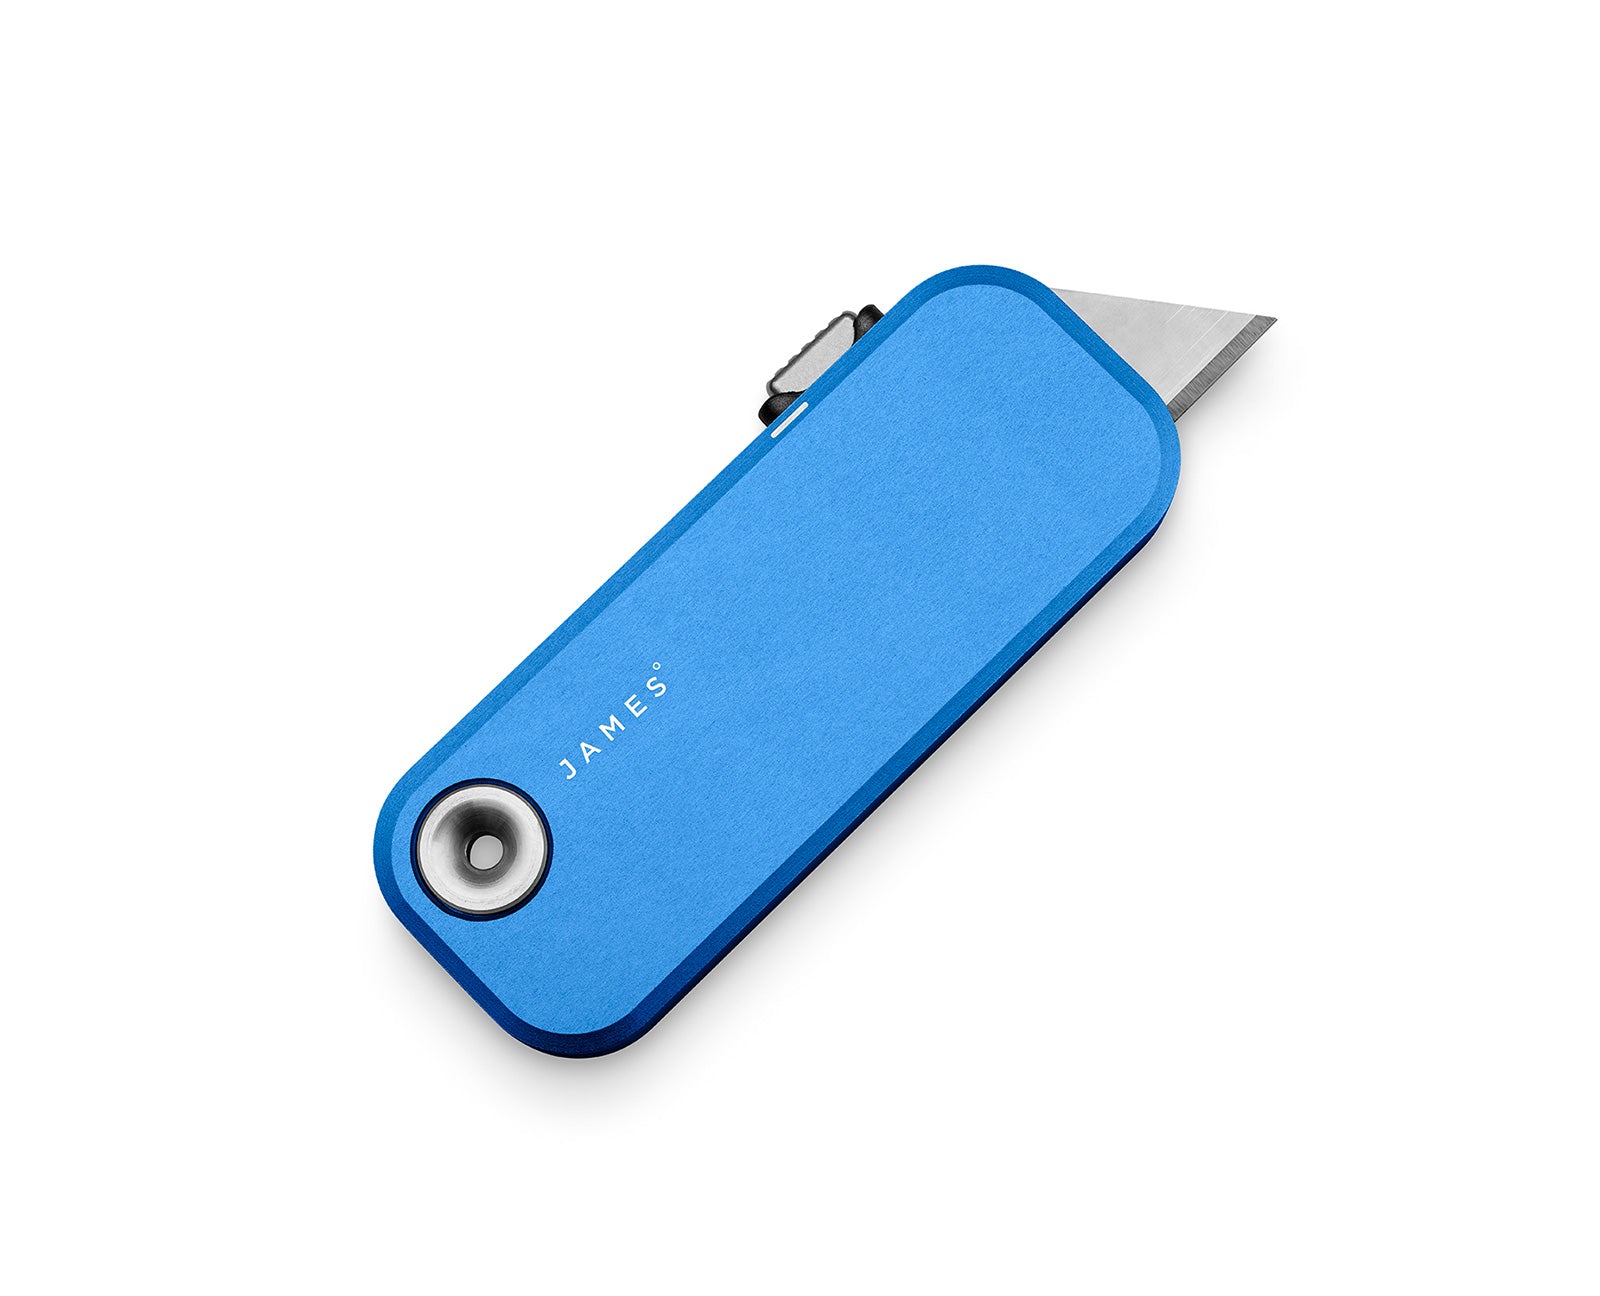 CANARY Heavy Duty Box Cutter Retractable Blade, Safety Corrugated